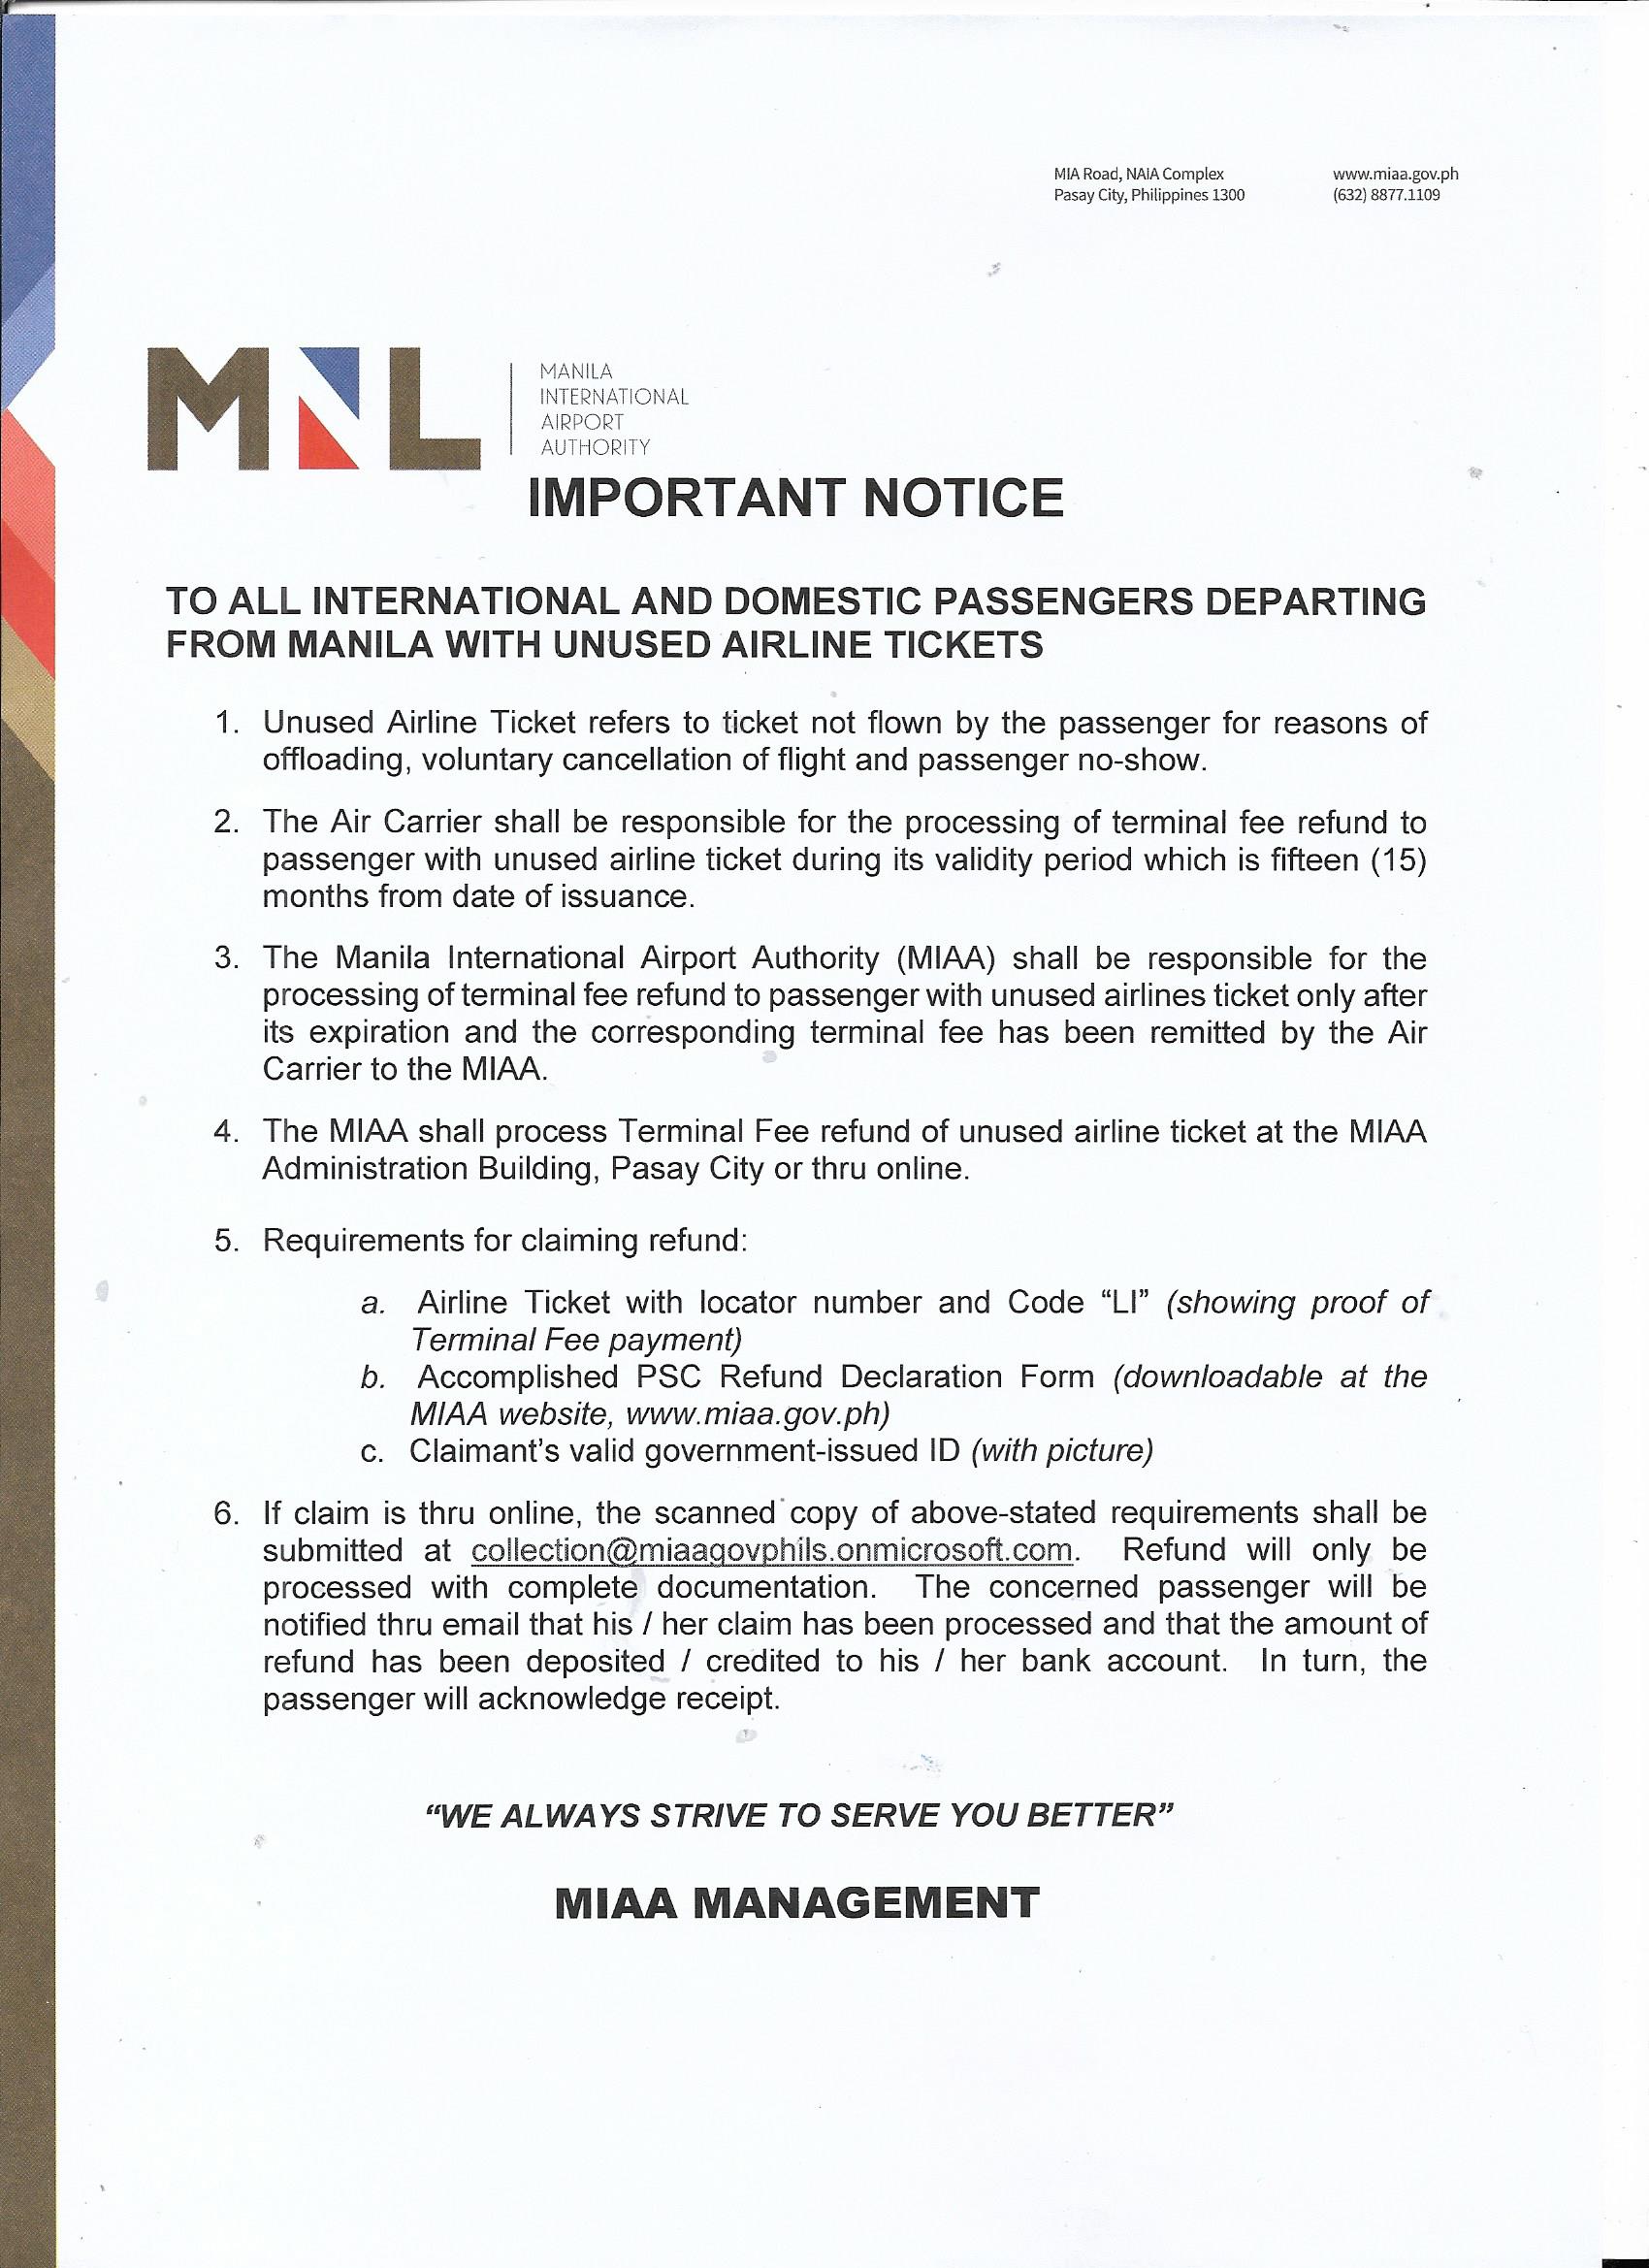 Naia On Twitter Important Notice To All Passengers Departing From Manila With Unused Airline Tickets Here Is The Process For Claiming Your Terminal Fee Refund Https T Co 4geu0knhu4 Twitter